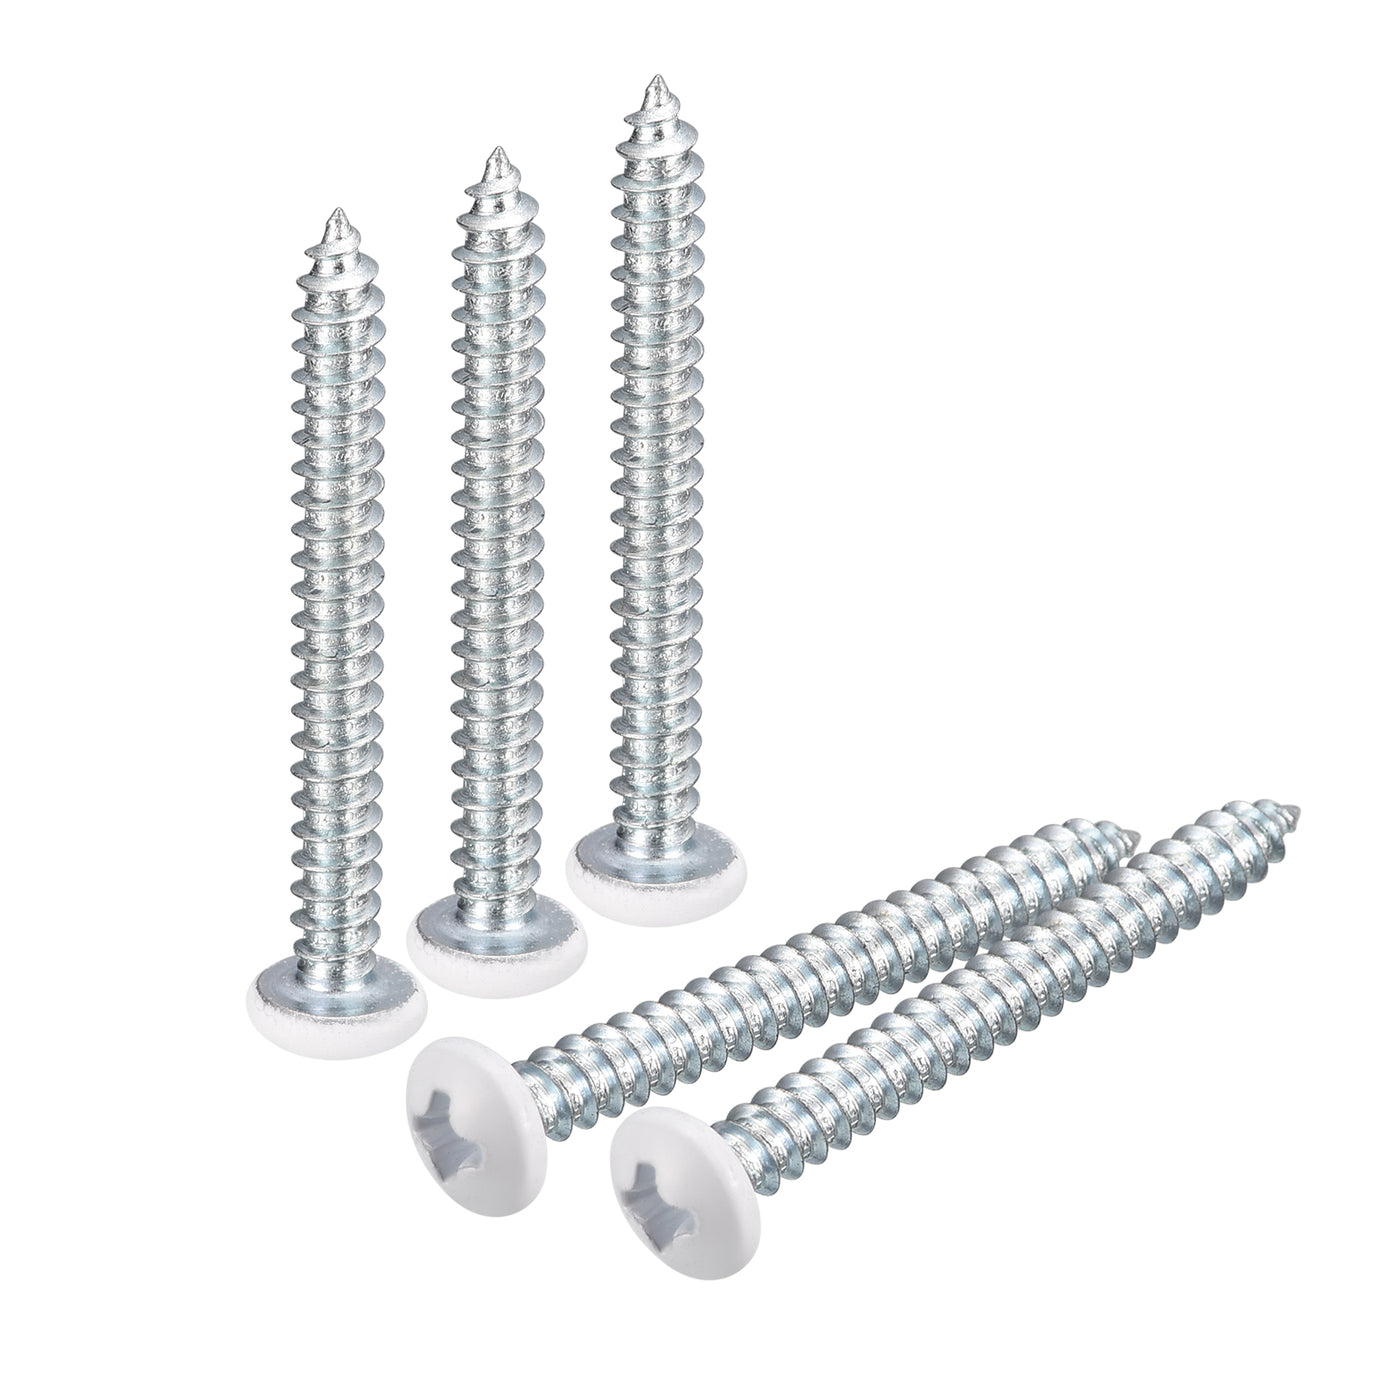 uxcell Uxcell ST4x35mm White Screws Self Tapping Screws, 100pcs Pan Head Phillips Screws